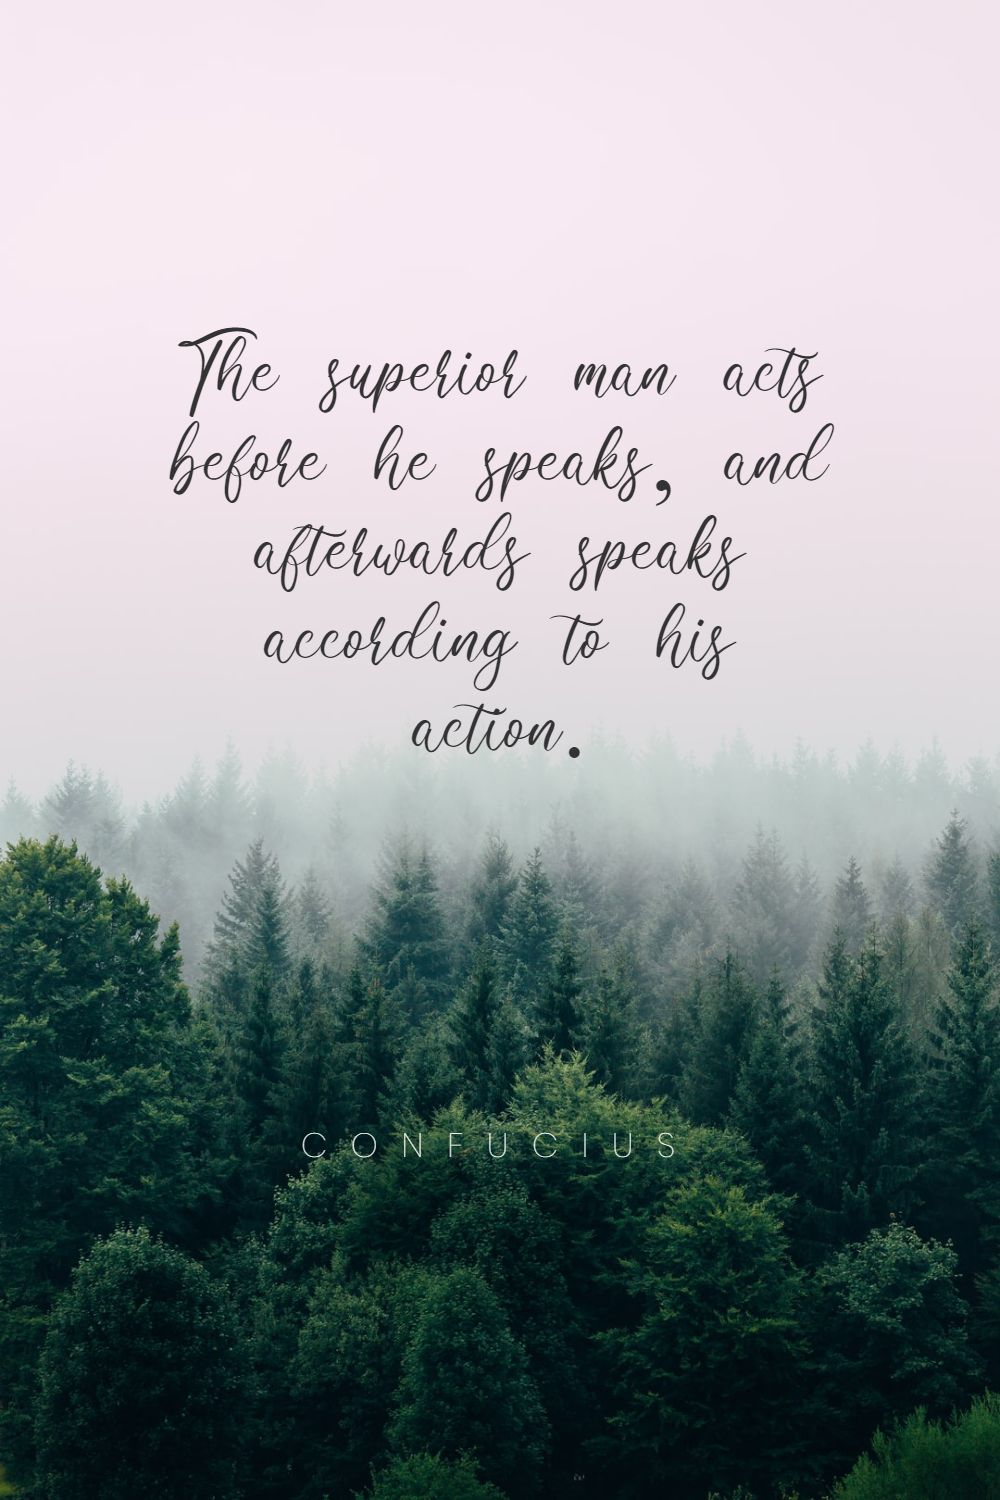 Quotes image of The superior man acts before he speaks, and afterwards speaks according to his action.